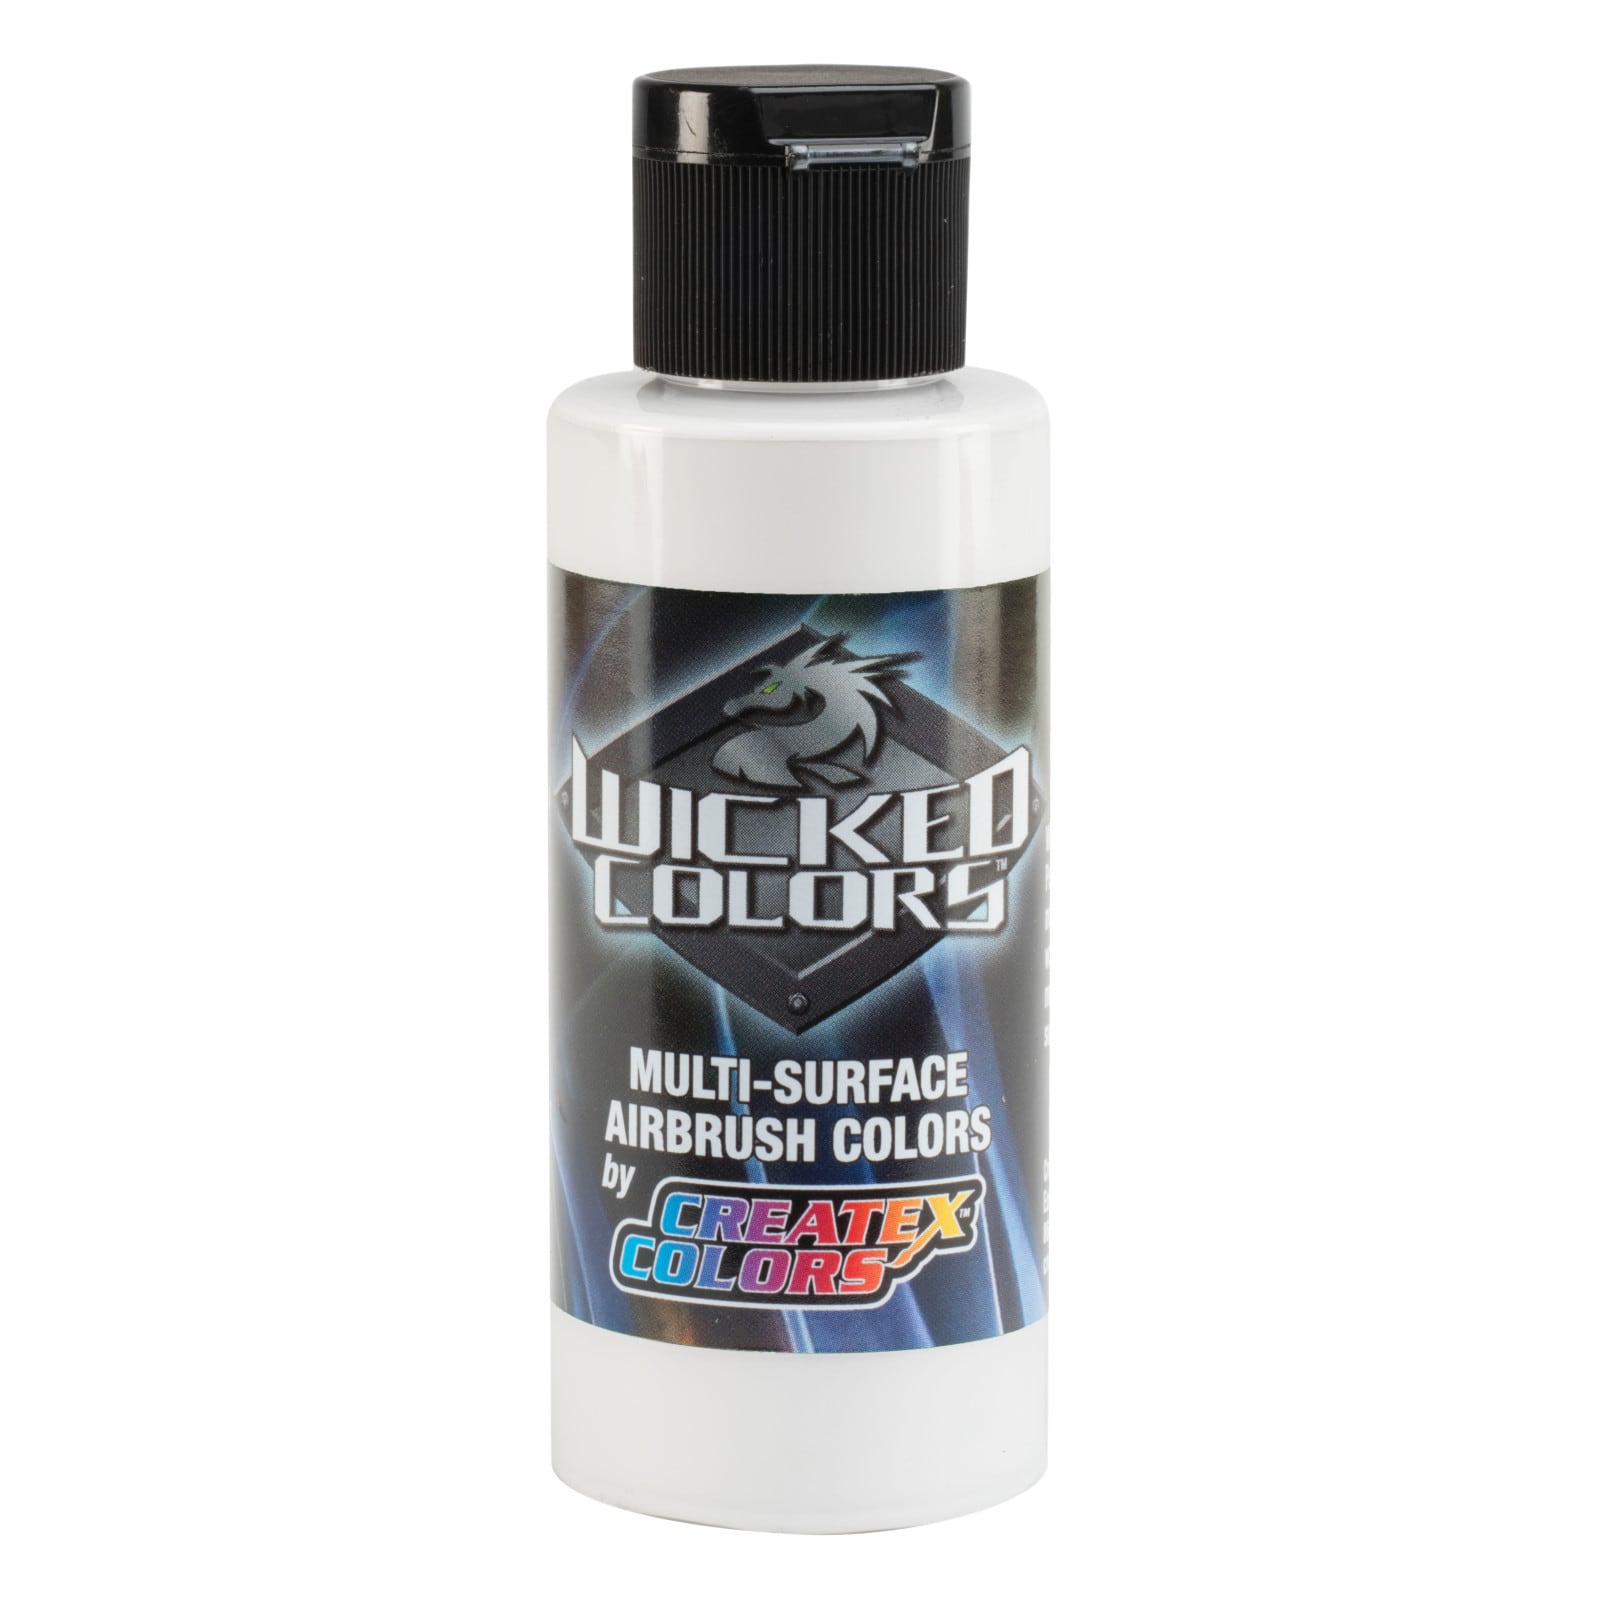 Createx&#x2122; Wicked Colors&#x2122; Airbrush Color, 2oz.